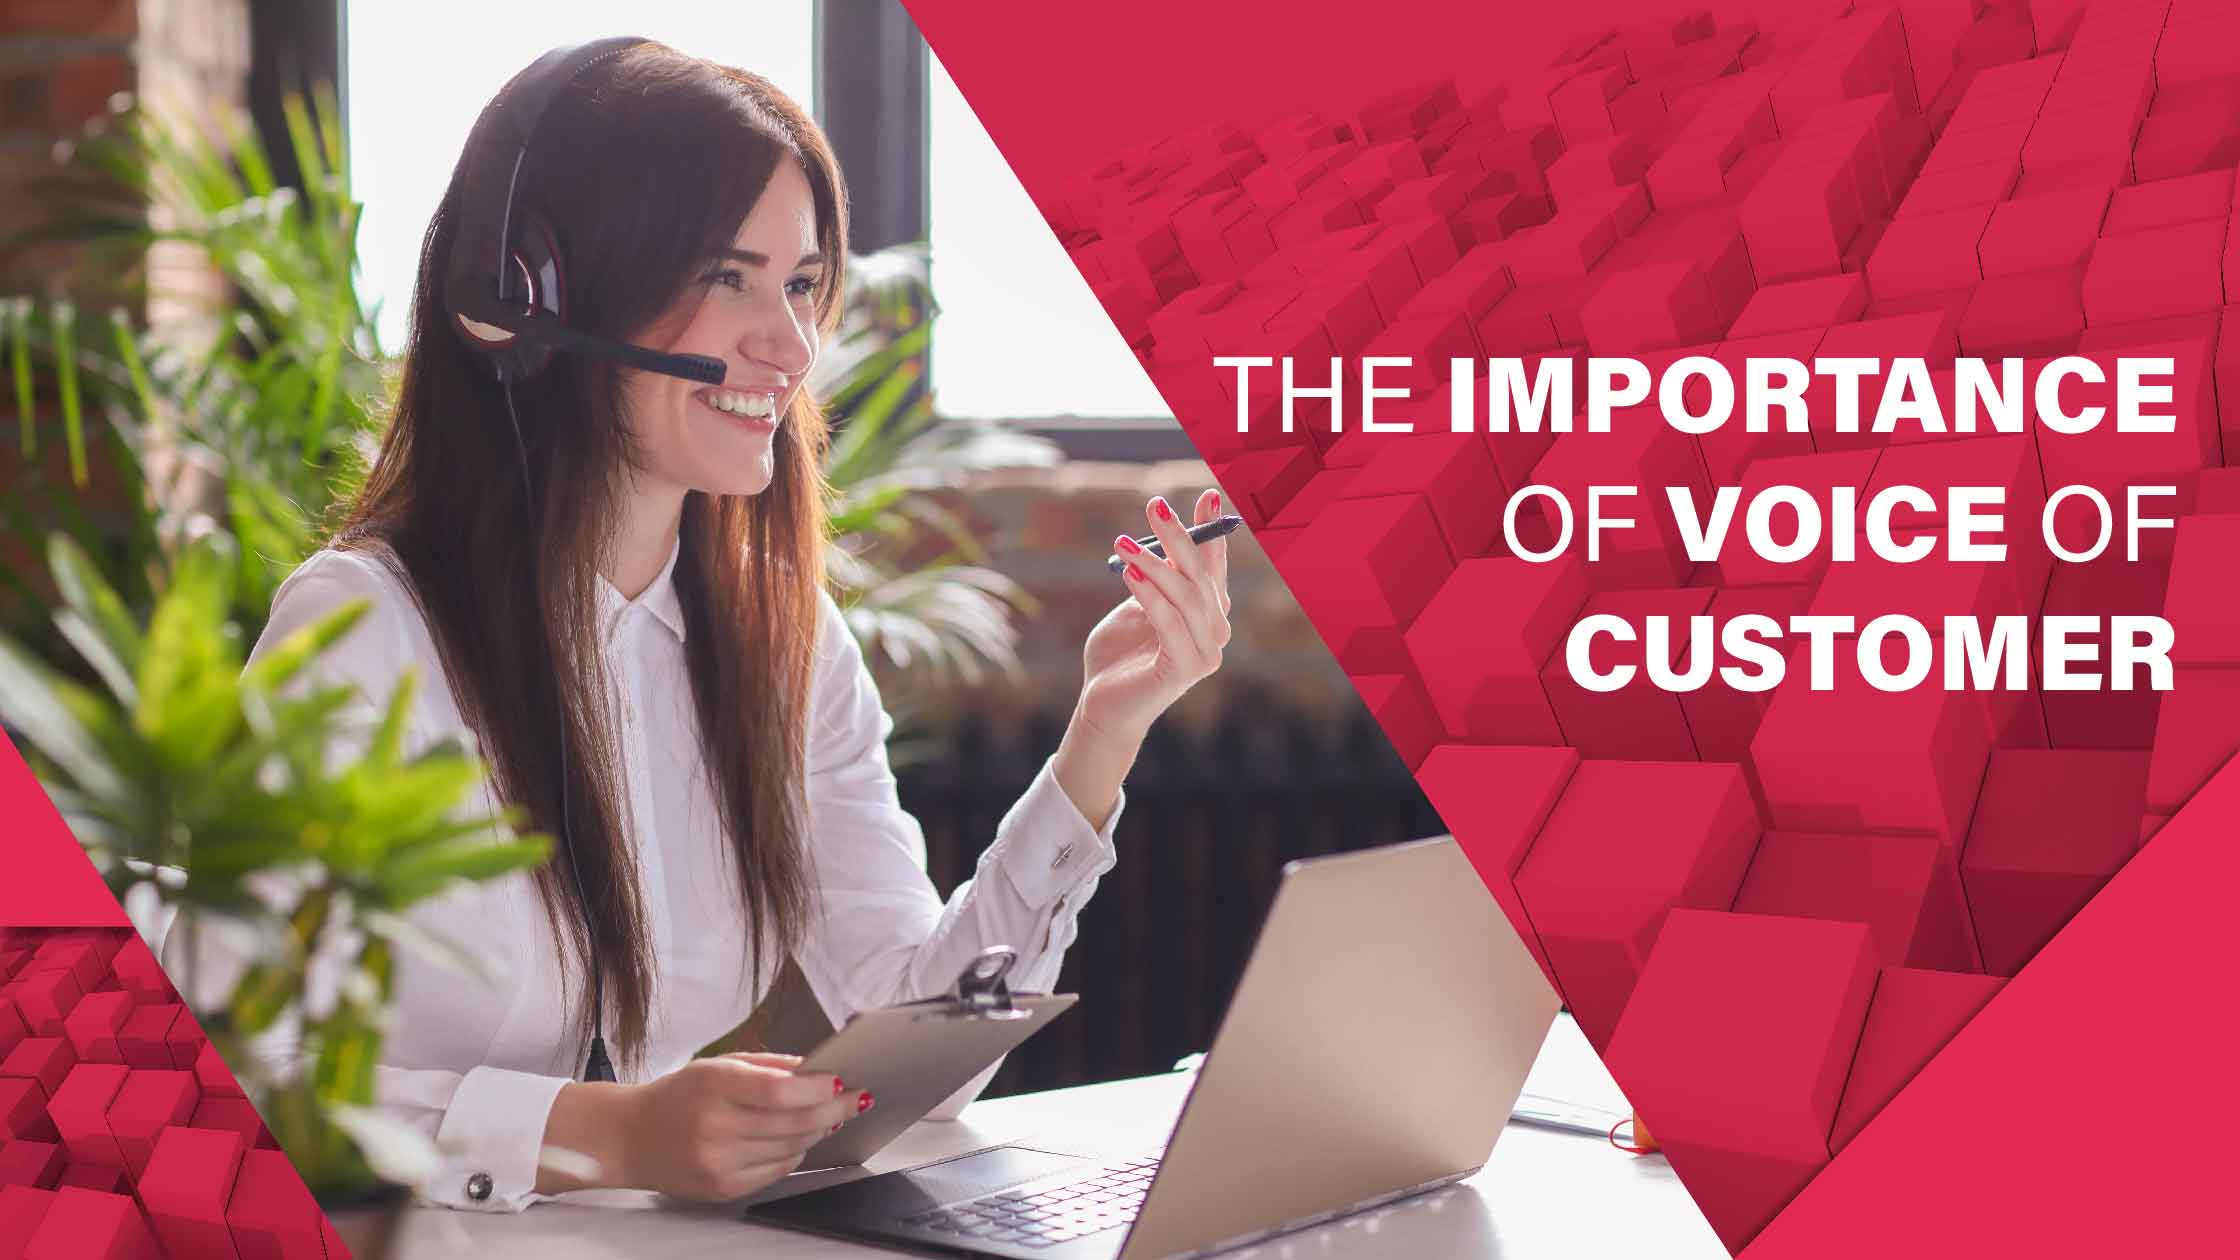 THE IMPORTANCE OF VOICE OF CUSTOMER